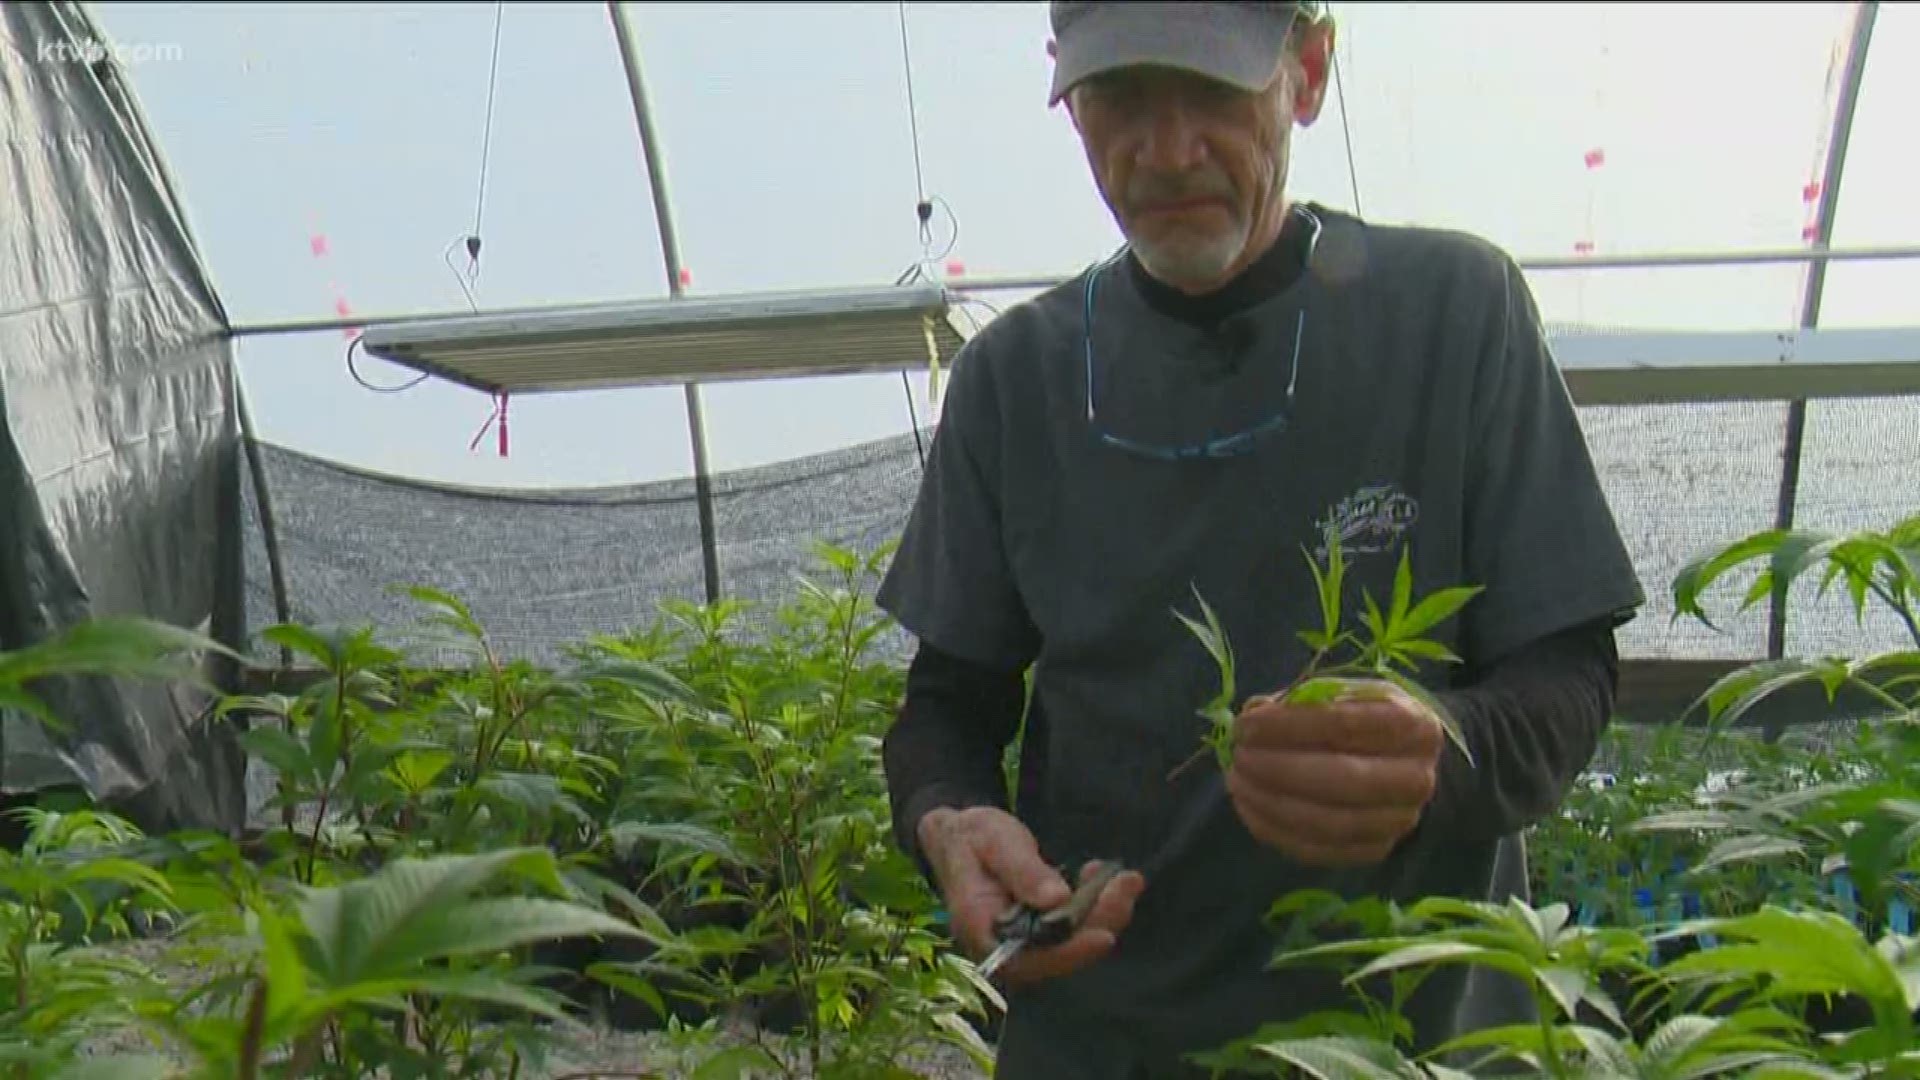 Burnt River Farms in Huntington, Oregon is a legal pot operation just an hour and a half from Boise.